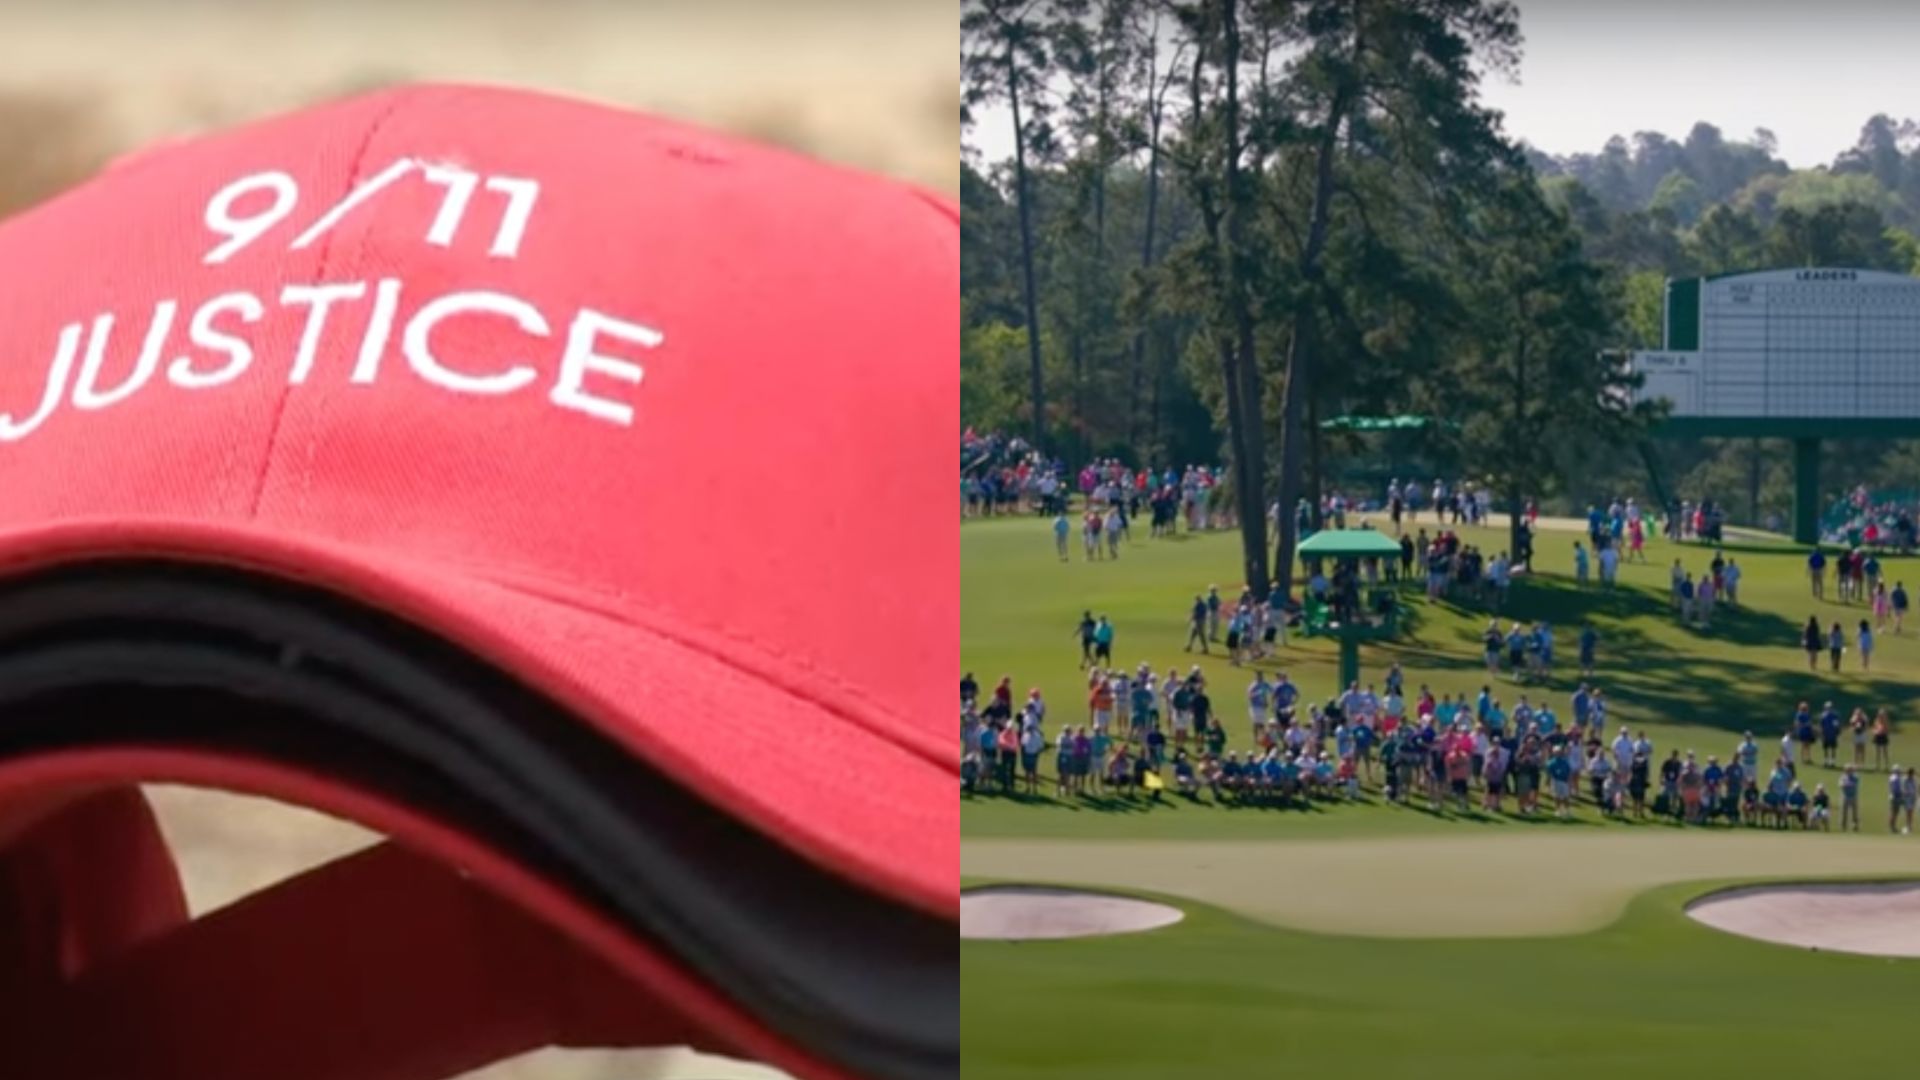 9/11 Families United Organization Threatens To Protest Golf’s Masters Championship After LIV Golfers Allowed To Compete (mediaite.com)